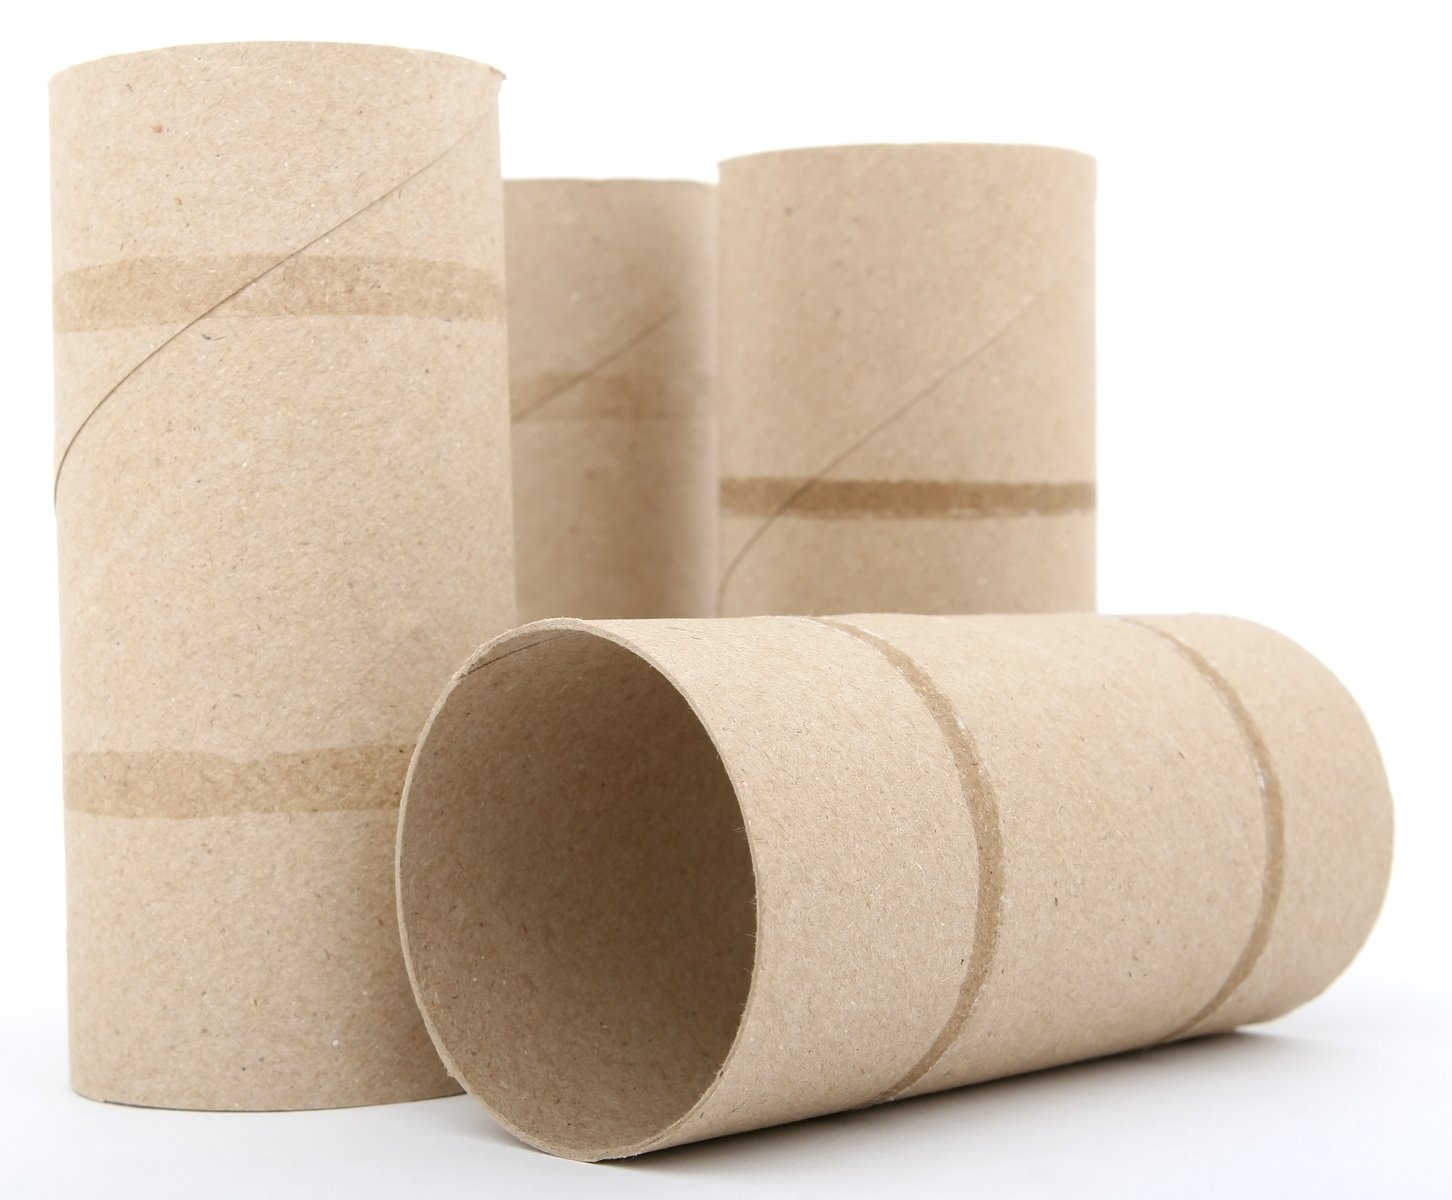 three toilet paper tube are placed on the floor